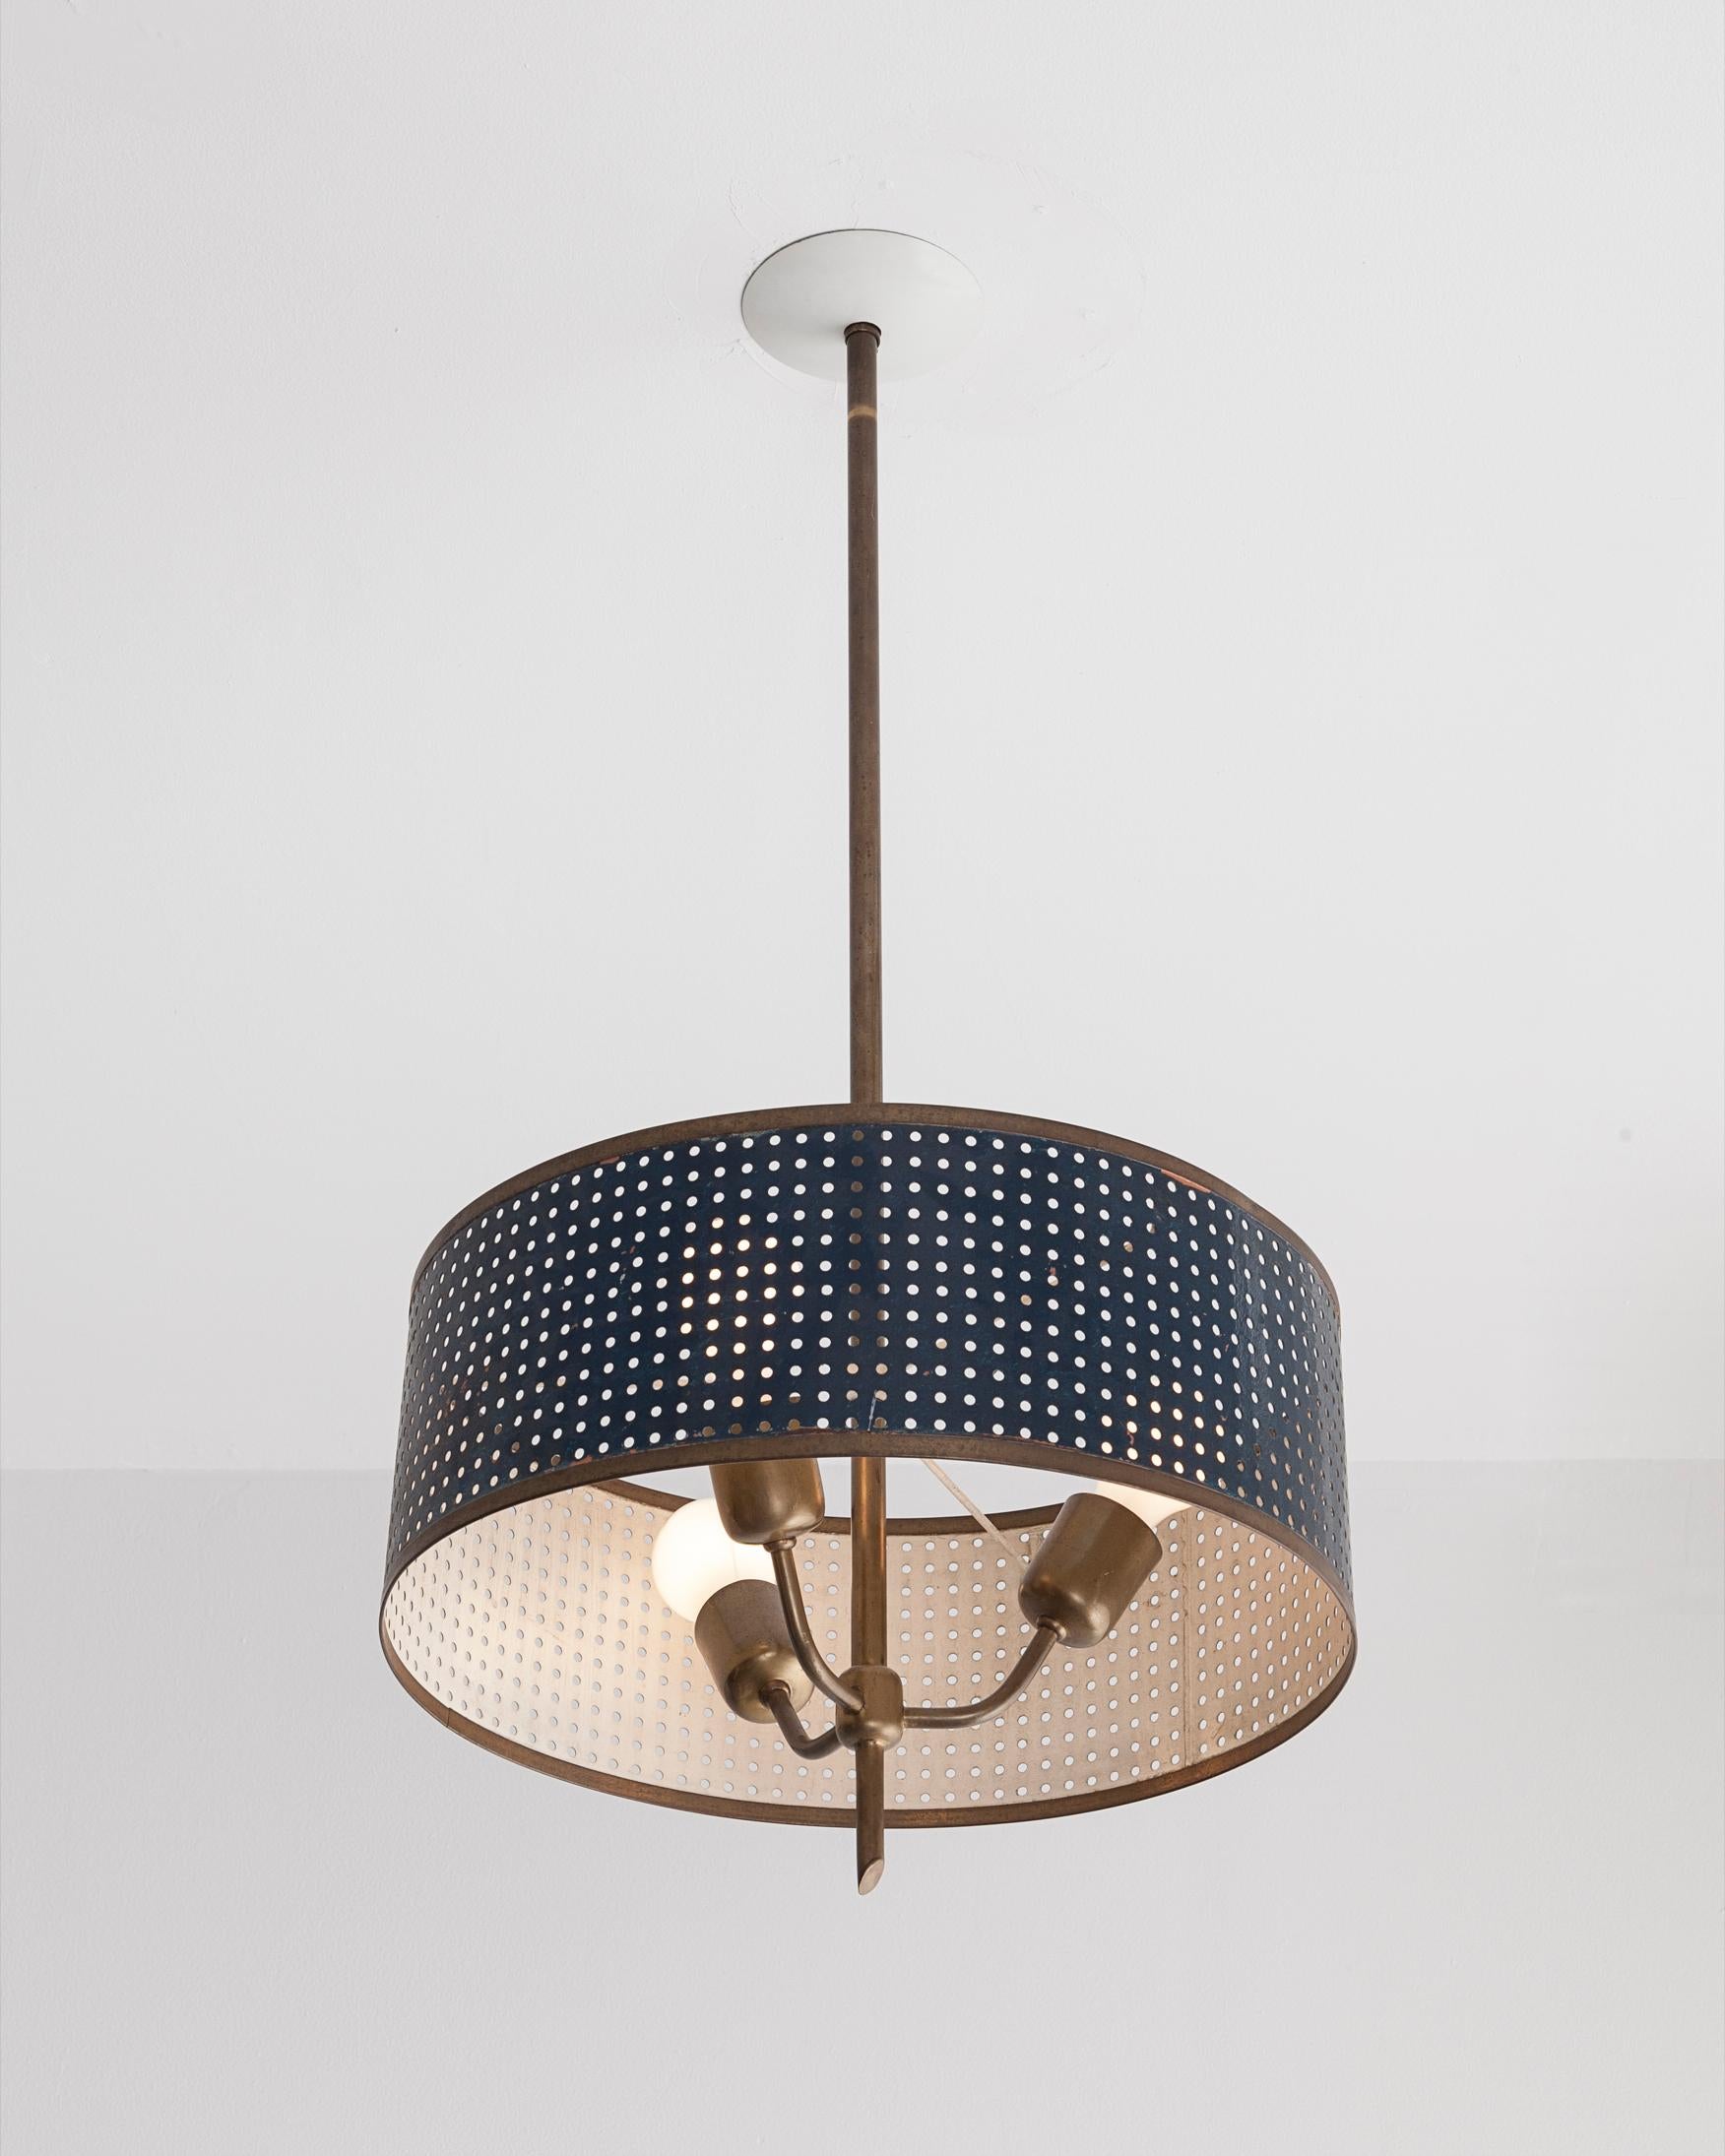 Argentine Blue Perforated Hanging Lamp with Metal Shade, circa 1960s